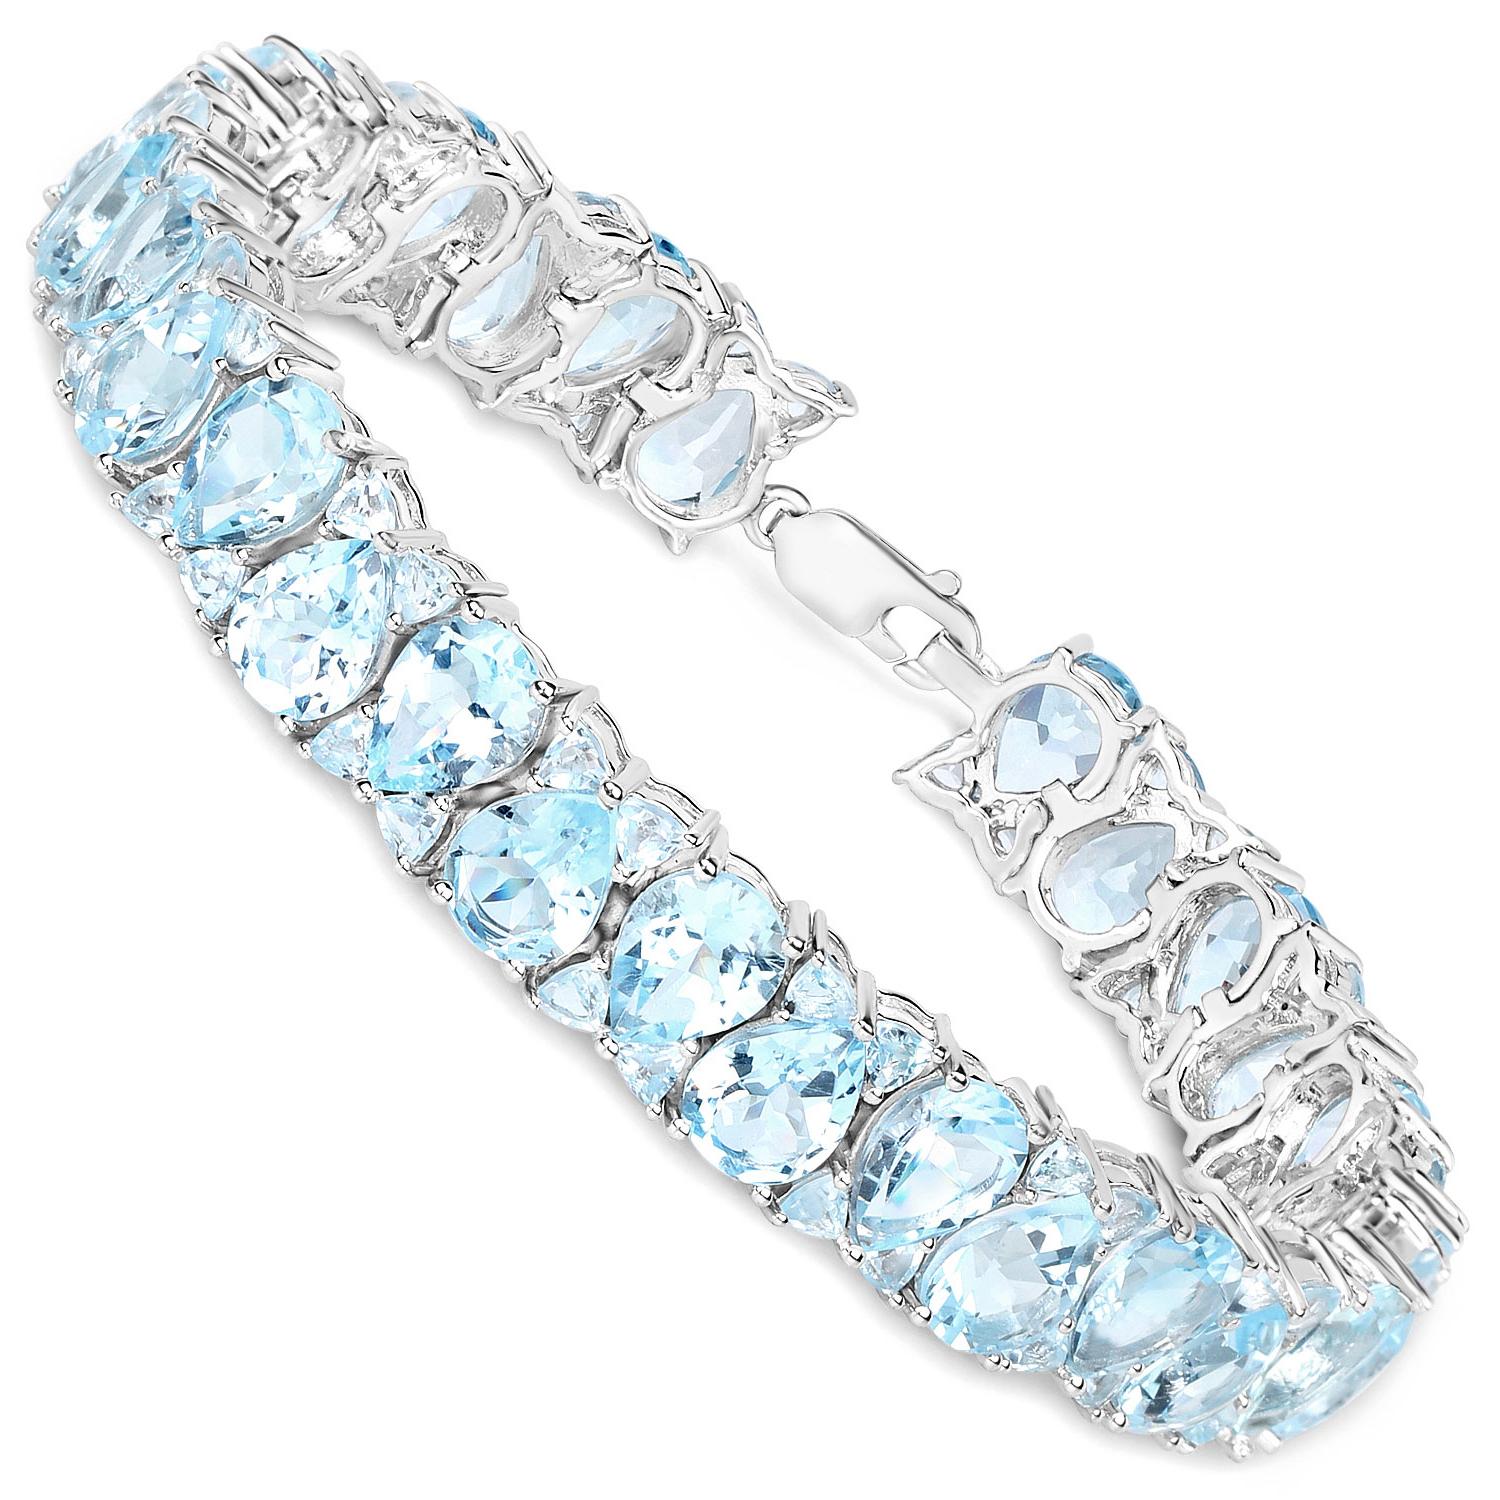 Contemporary Blue Topaz Tennis Bracelet 58.76 Carats Rhodium Plated Sterling Silver For Sale